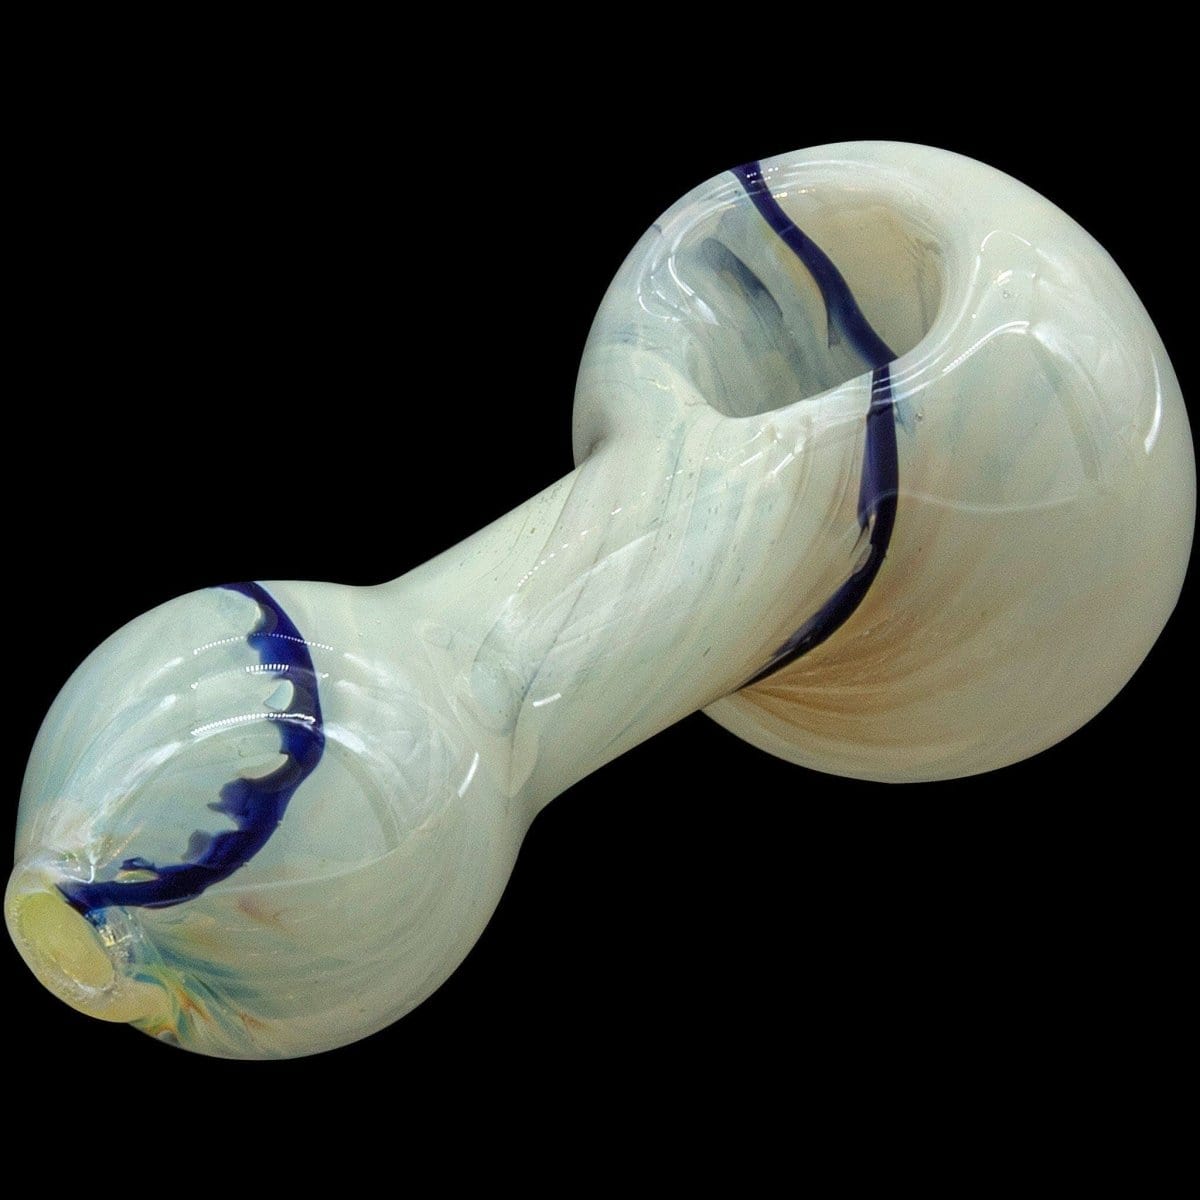 LA Pipes Hand Pipe Blue / Large "Bones" White Color Spoon Pipe